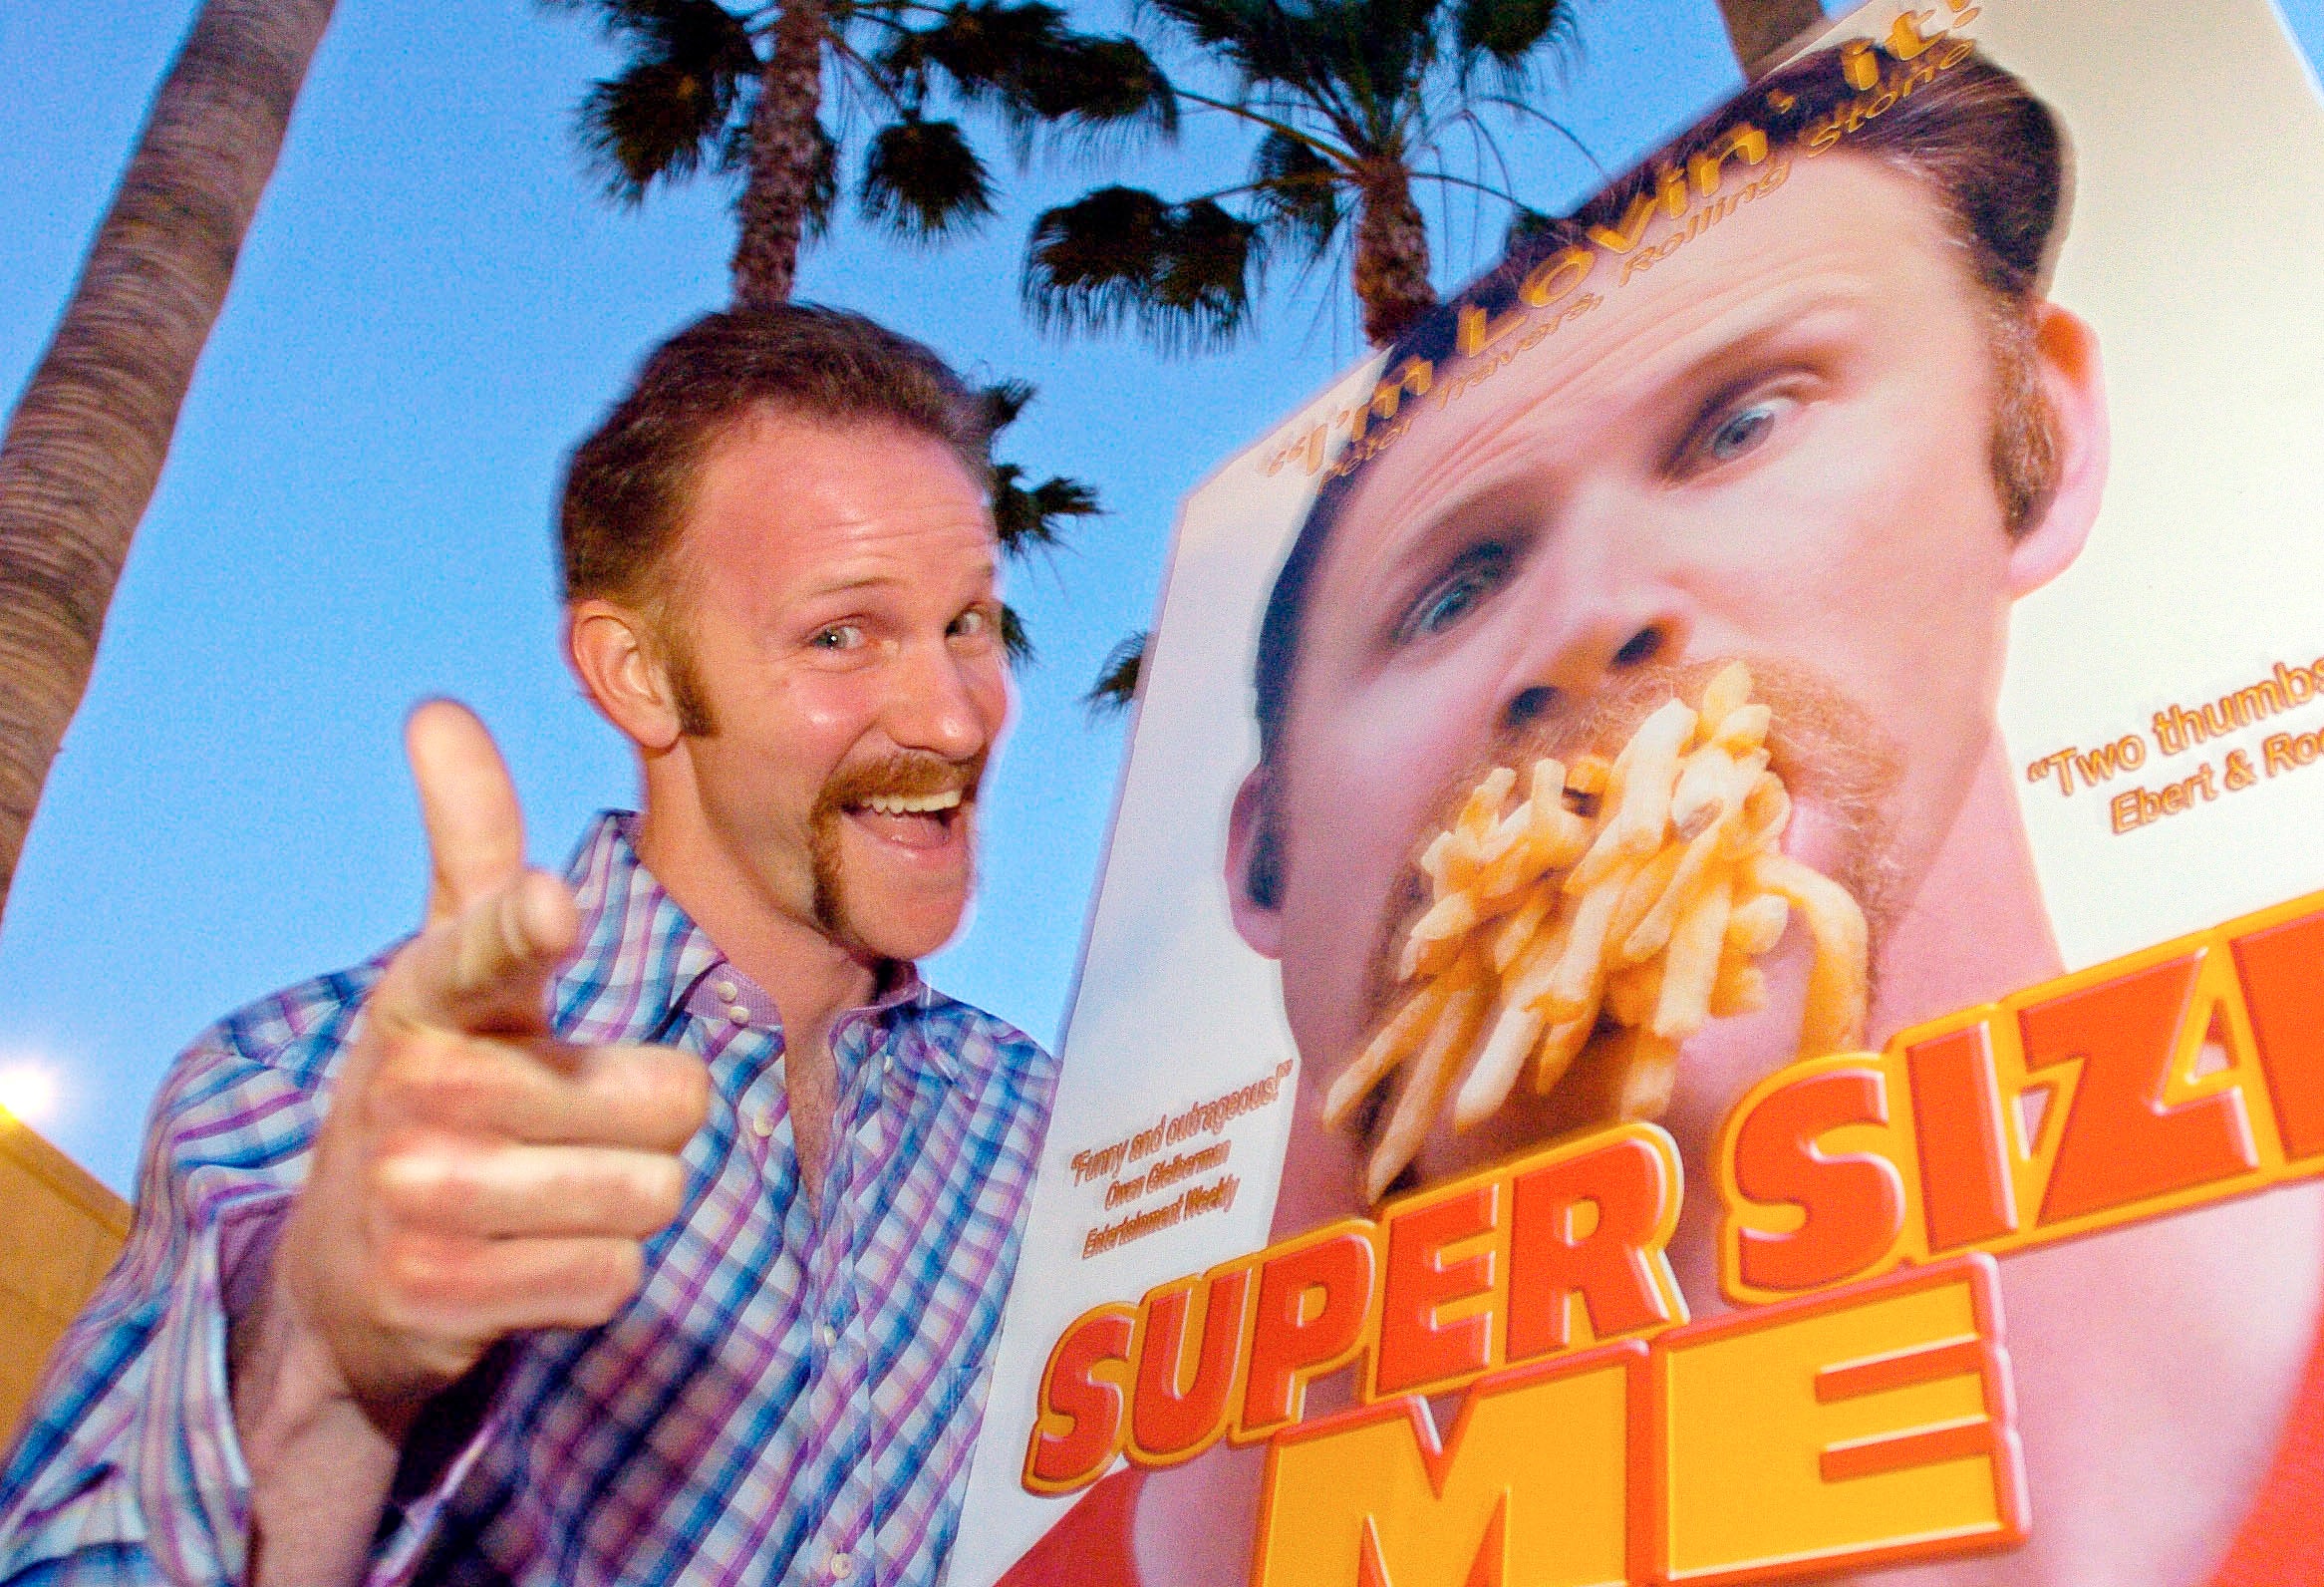 Morgan Spurlock became one of the highest-earning documentary filmmakers ever